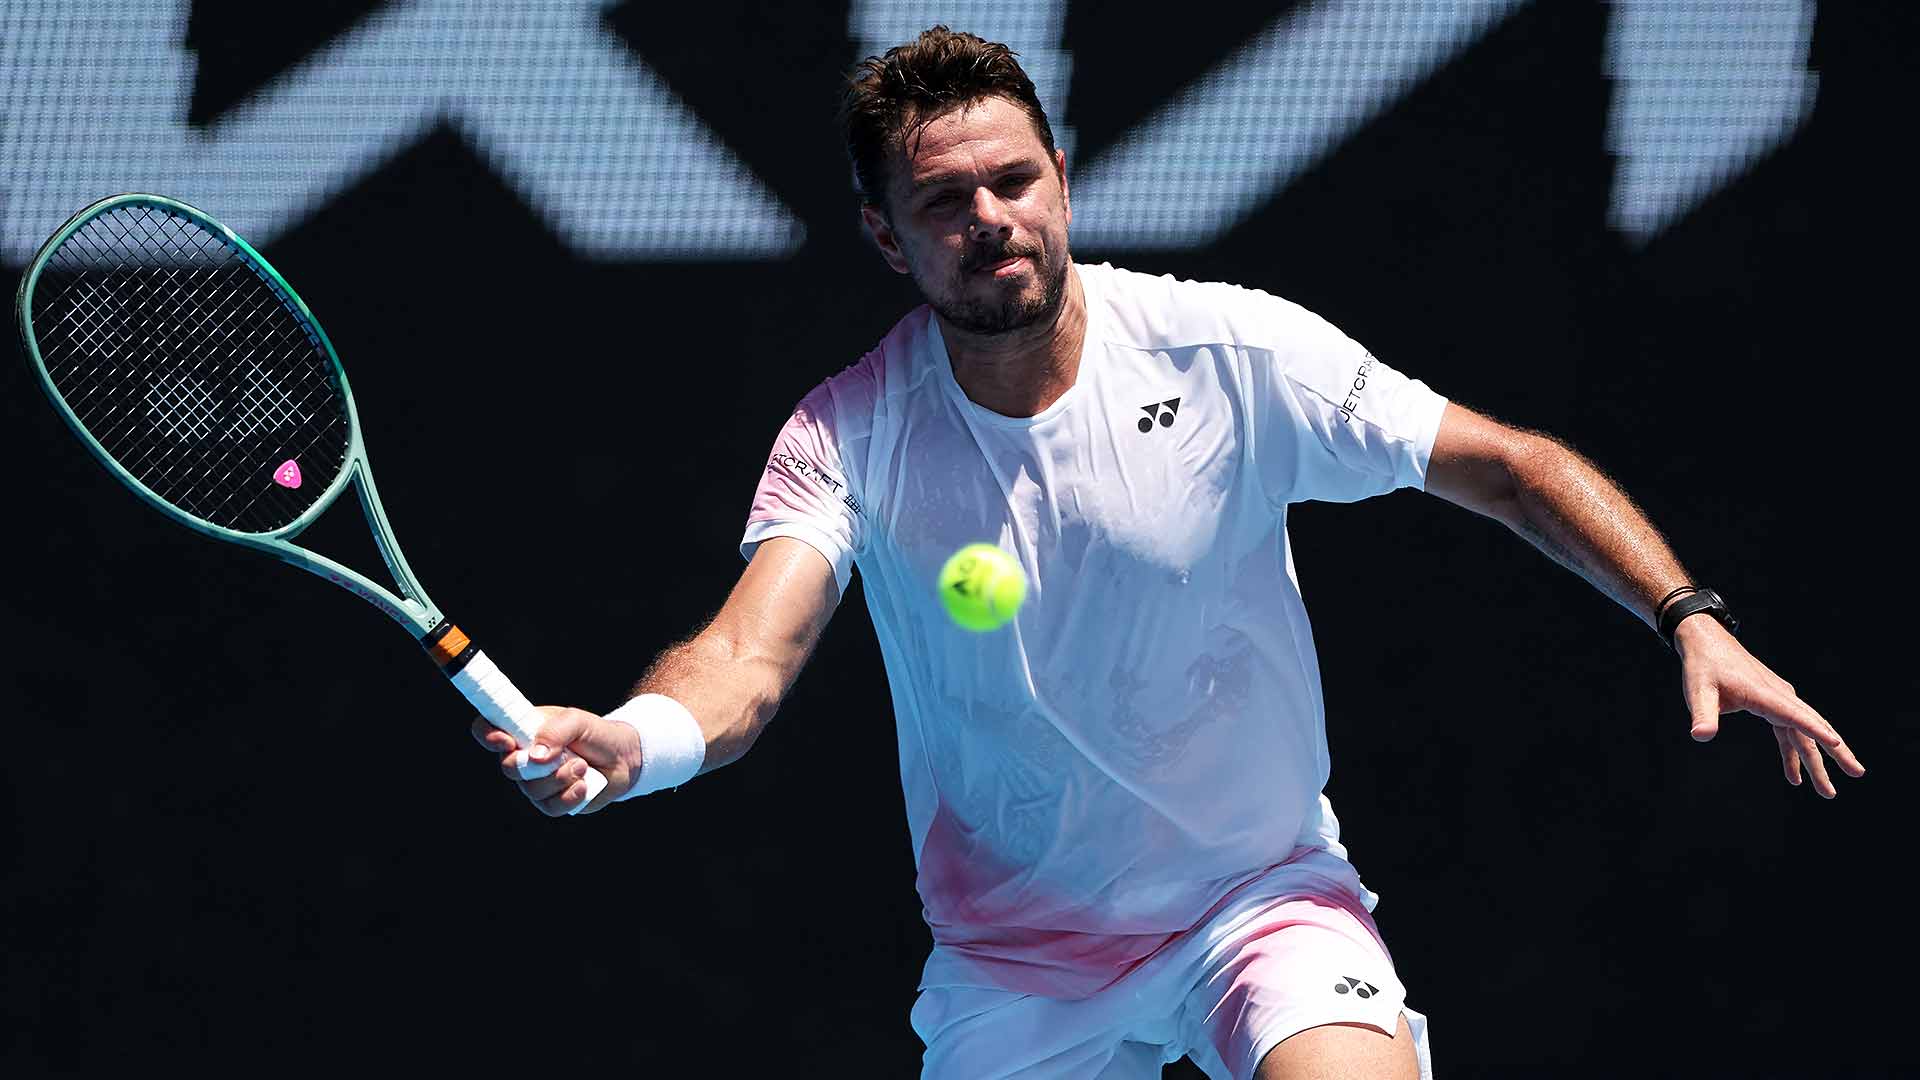 Stan Wawrinka pushed No. 20 seed Adrian Mannarino hard early, but faded in the last two sets.